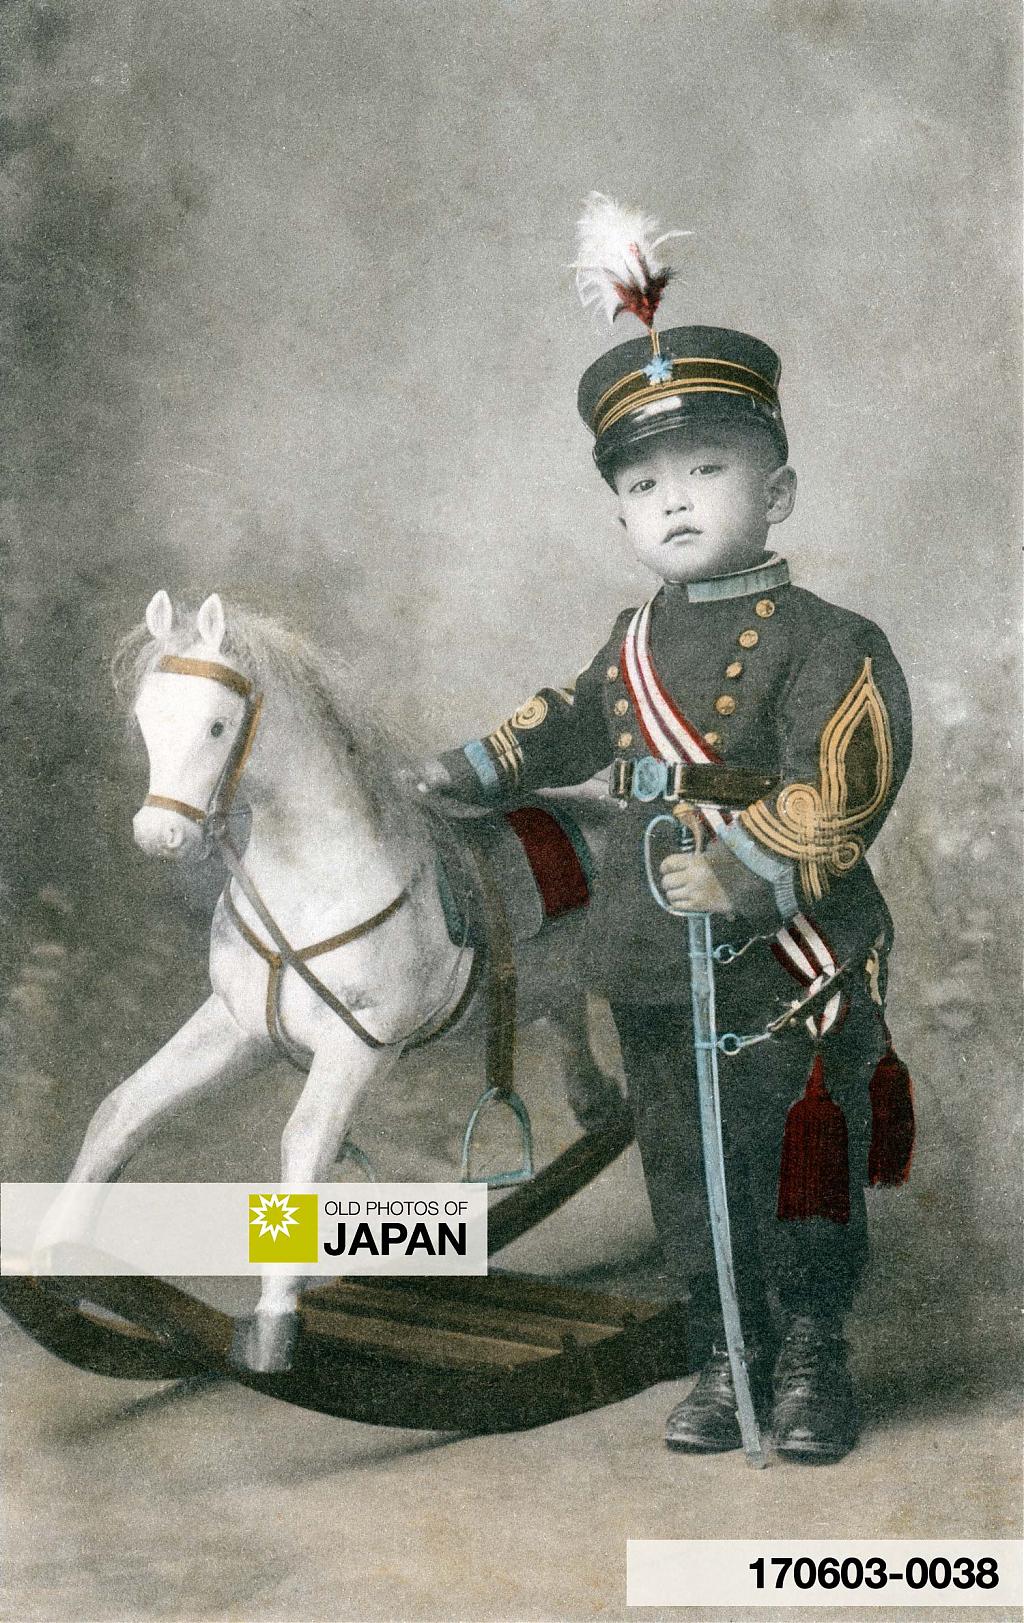 170603-0038 - Japanese Boy in Uniform with Toy Horse